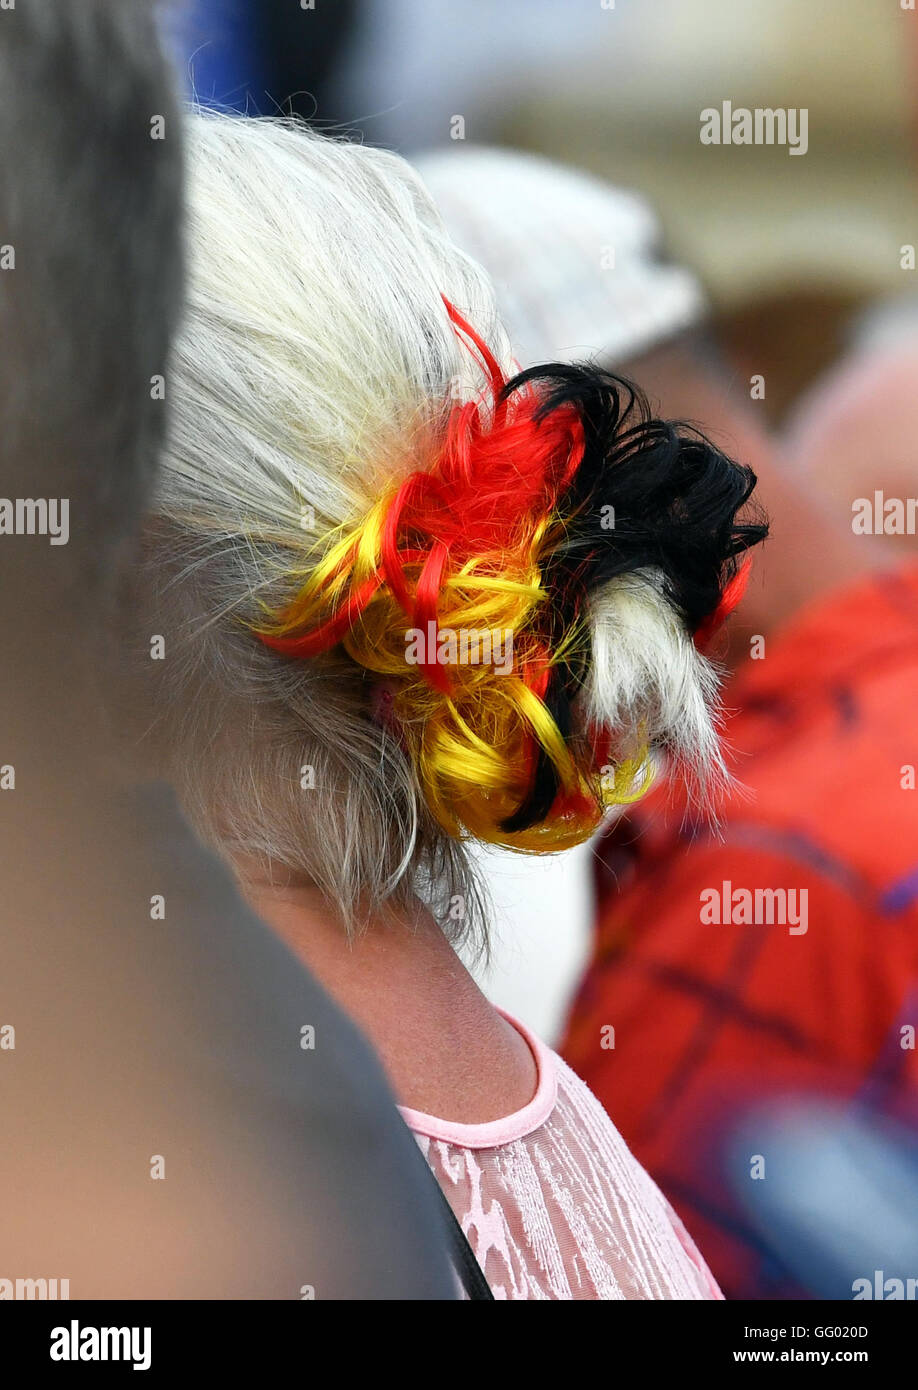 A female supporter of the anti-islam, right-wing populist political movement 'Pegida', wears a black-red-gold scrunchie during a demonstration in Dresden (Saxony), Germany, 01 August 2016. Photo: dpa-Zentralbild Stock Photo